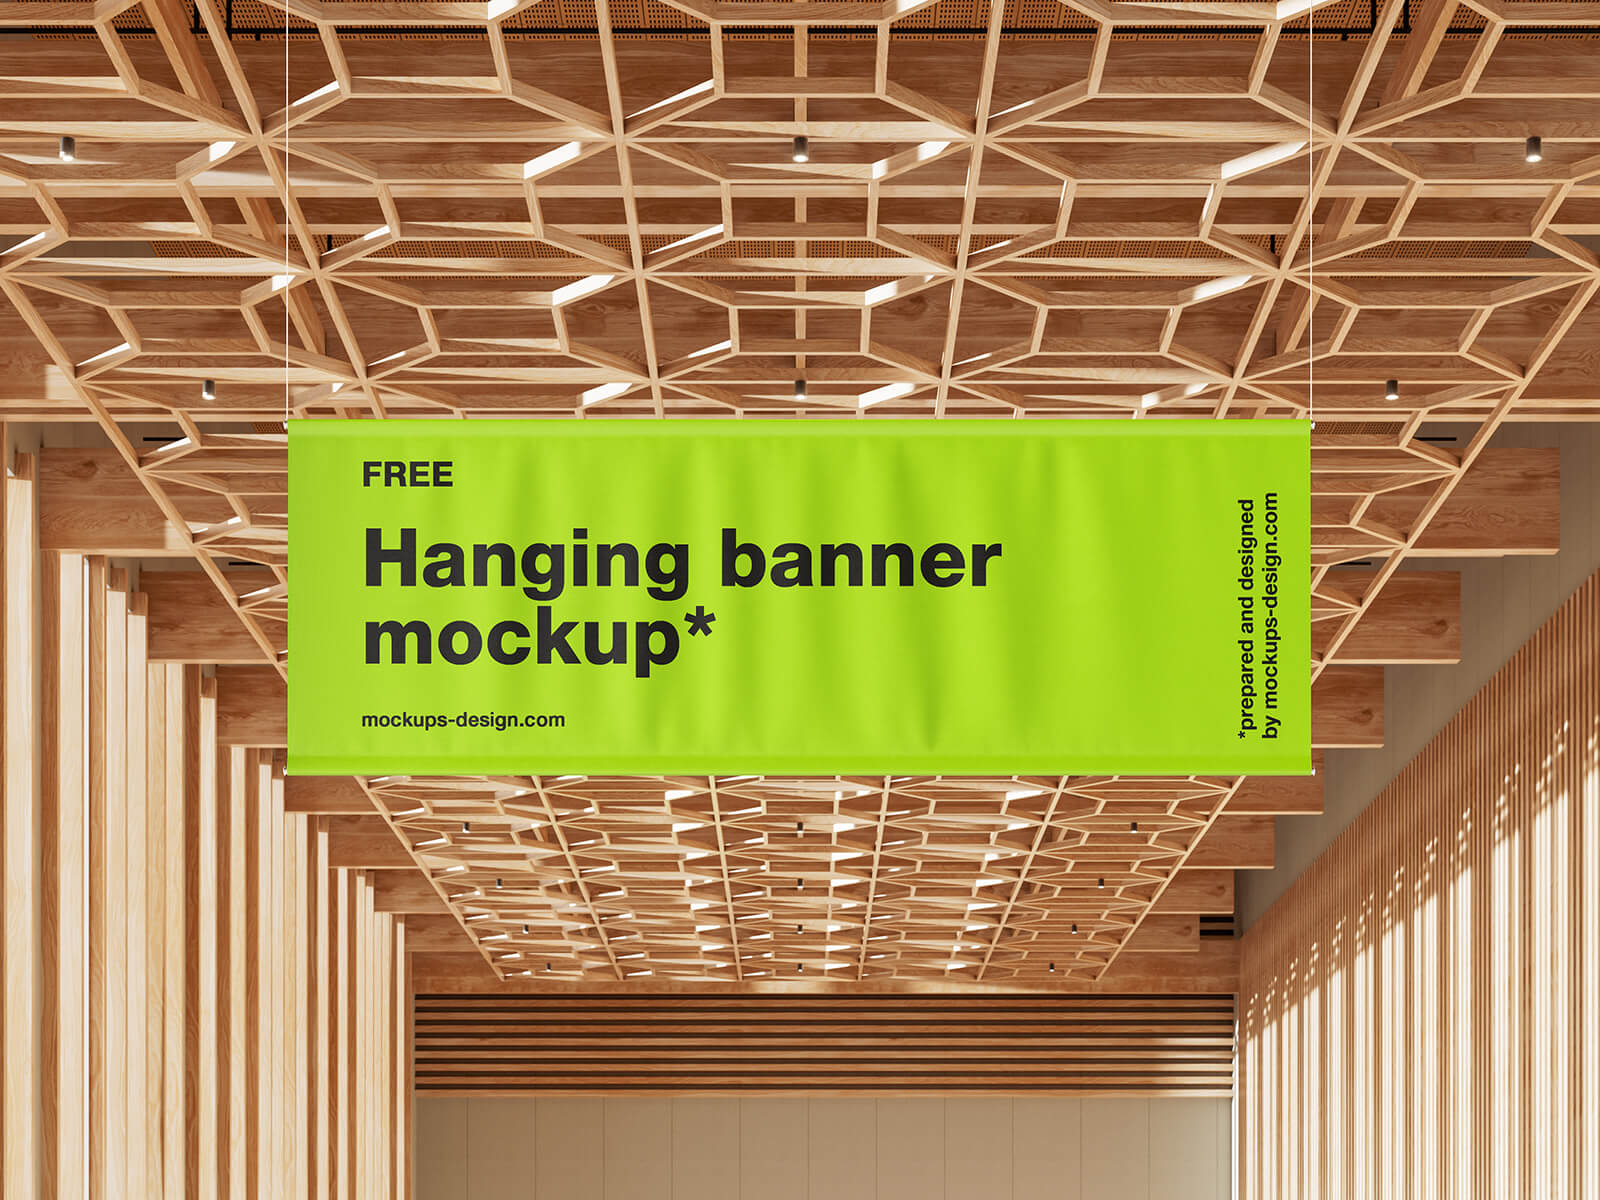 Expo Hall Ceiling Hanging Banner Mockup